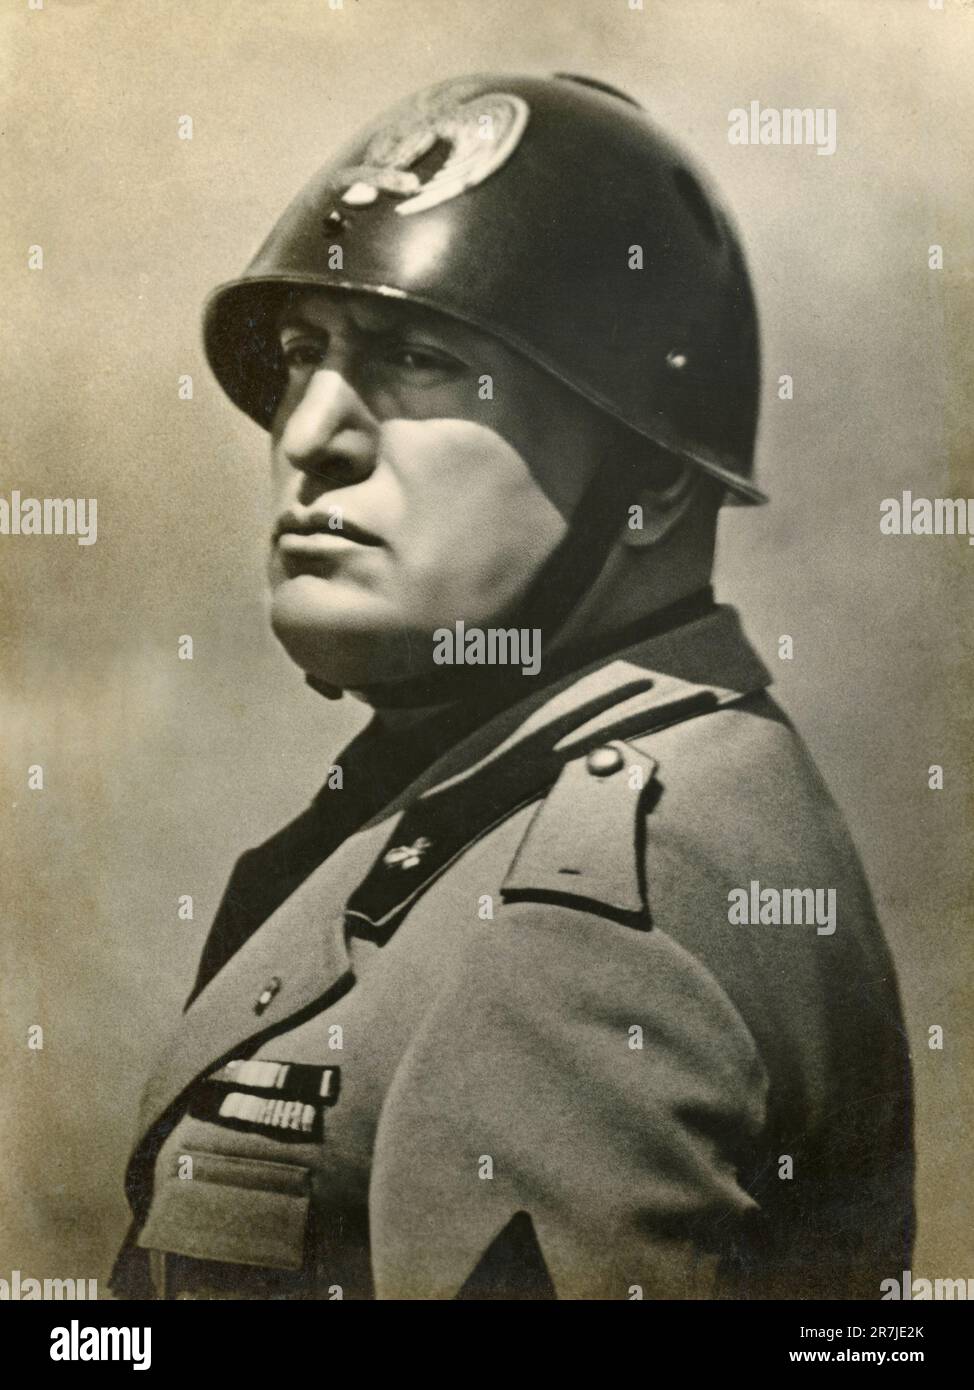 Portrait of Italian journalist, politician and dictator Benito Mussolini wearing helmet and uniform, Italy 1930s Stock Photo